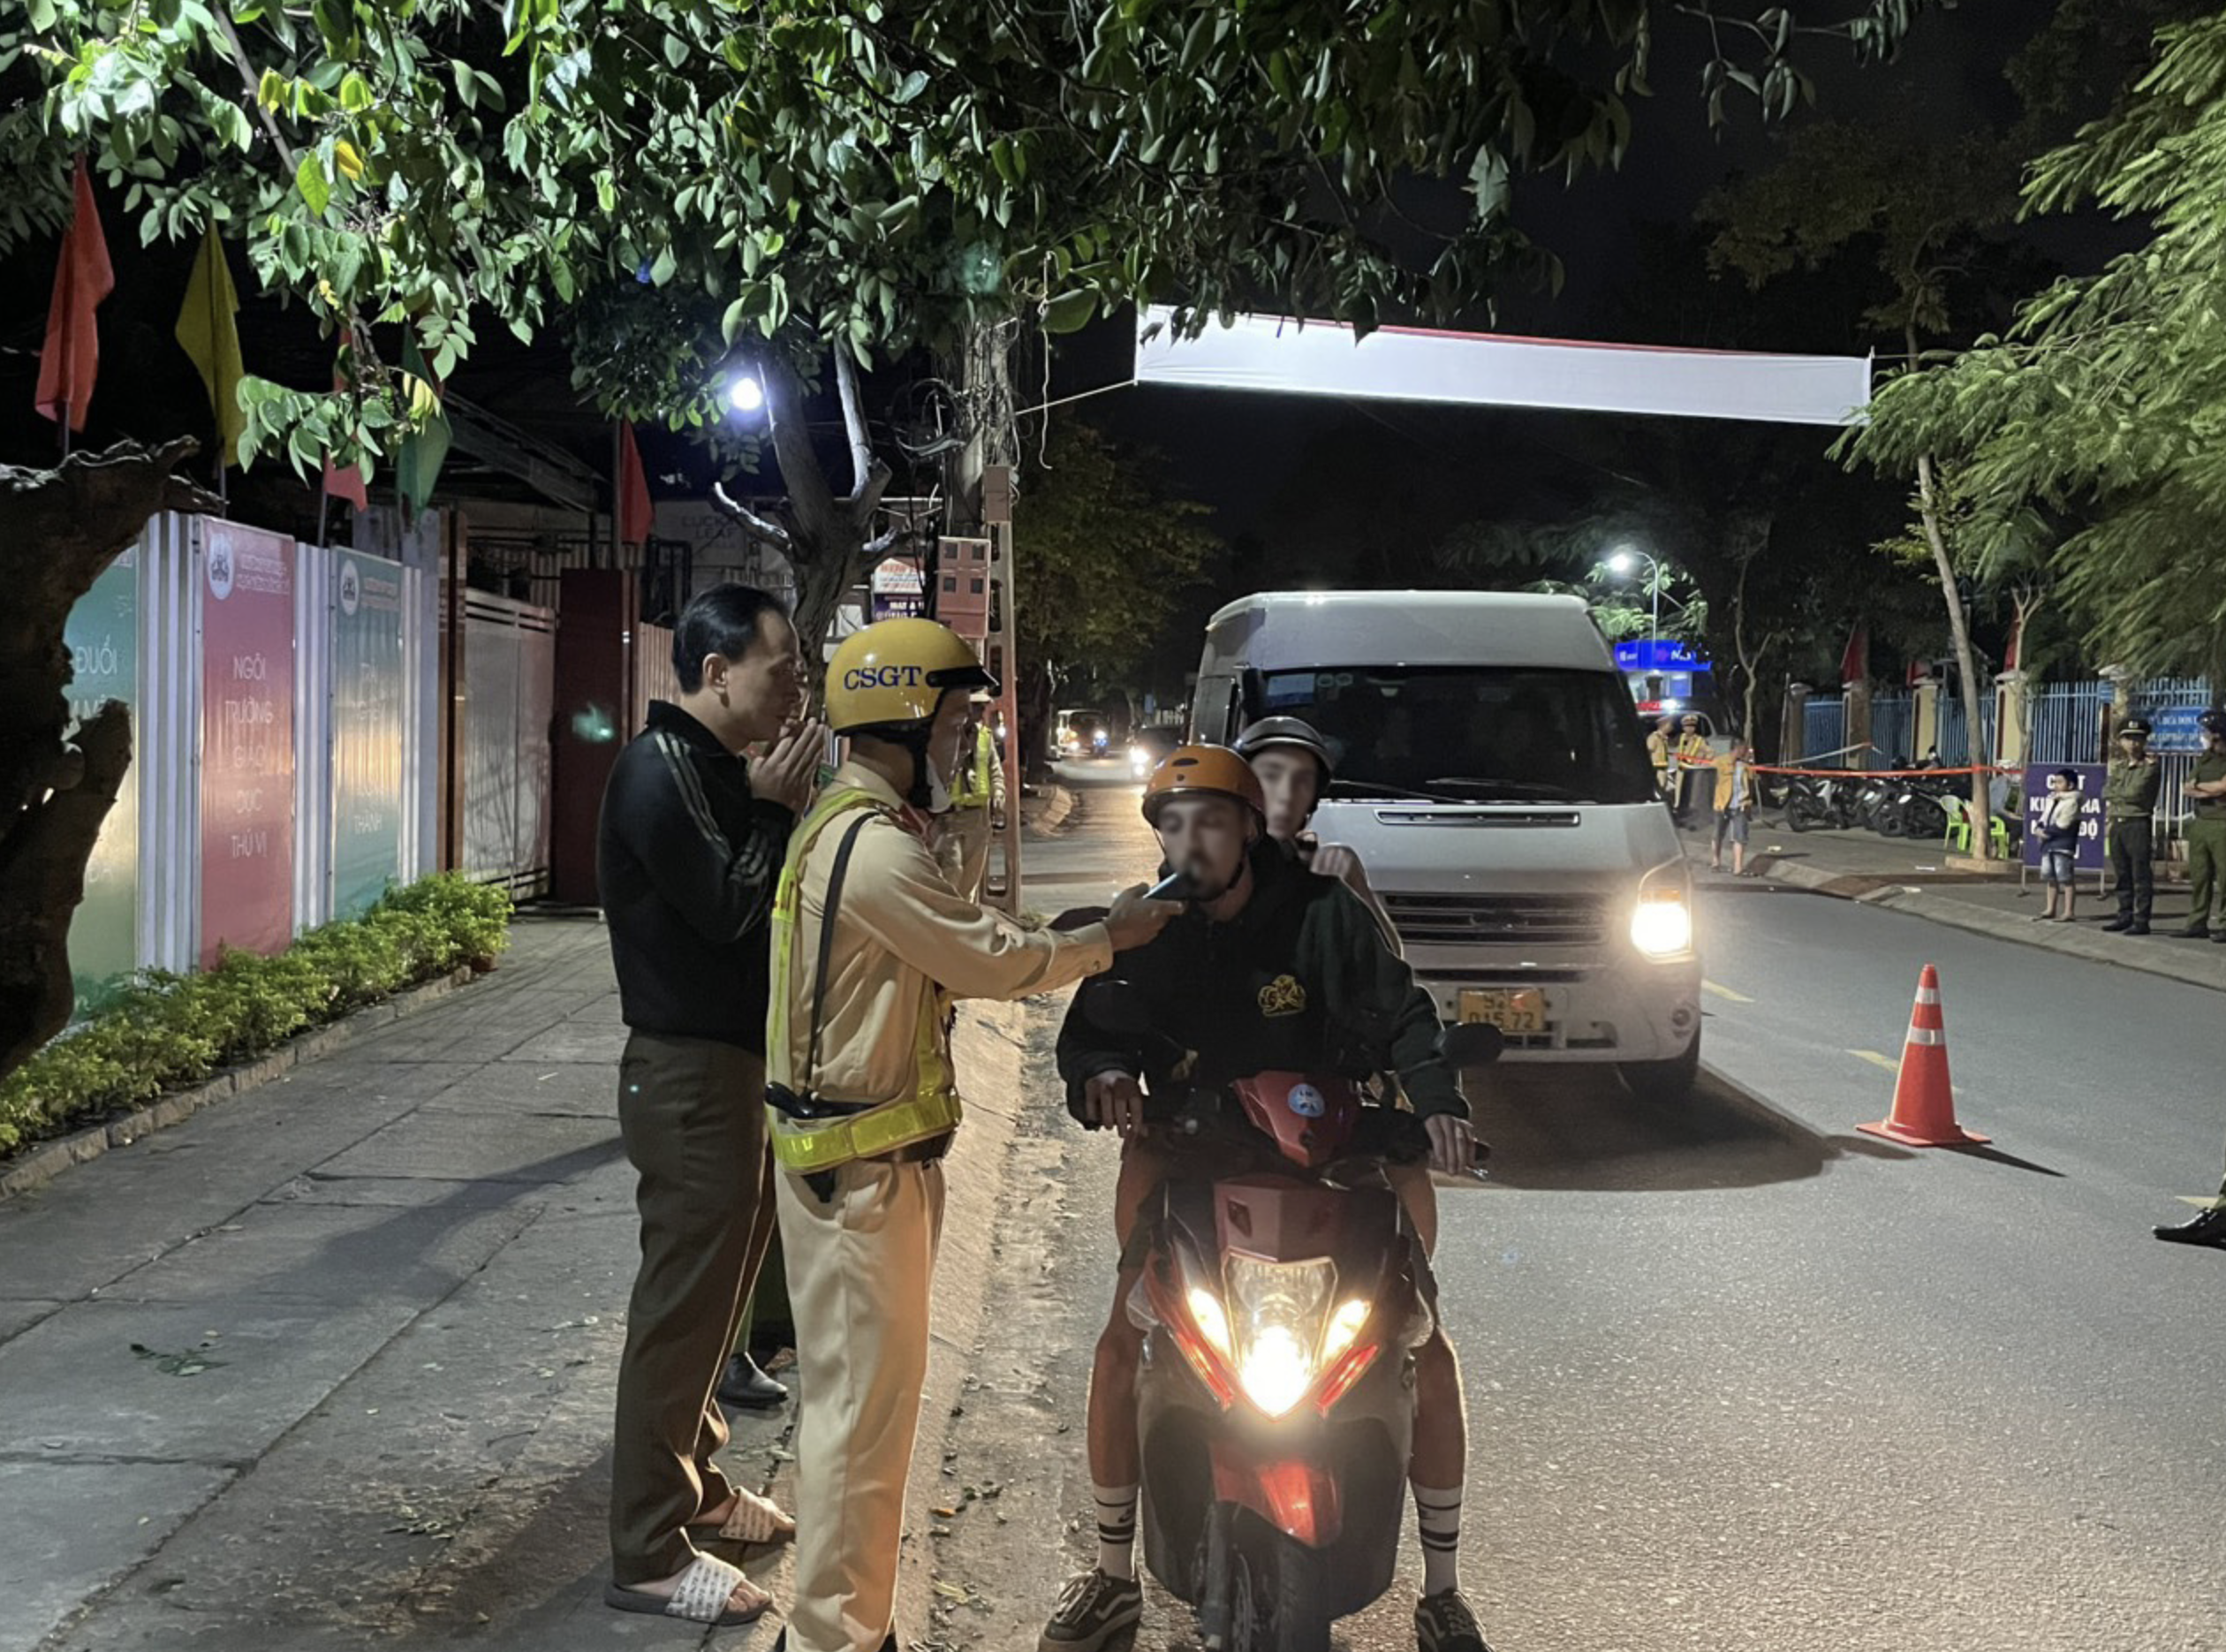 A foreigner undergoes a breath test in Hoi An City, Quang Nam Province, central Vietnam. Photo: Q.H. / Tuoi Tre